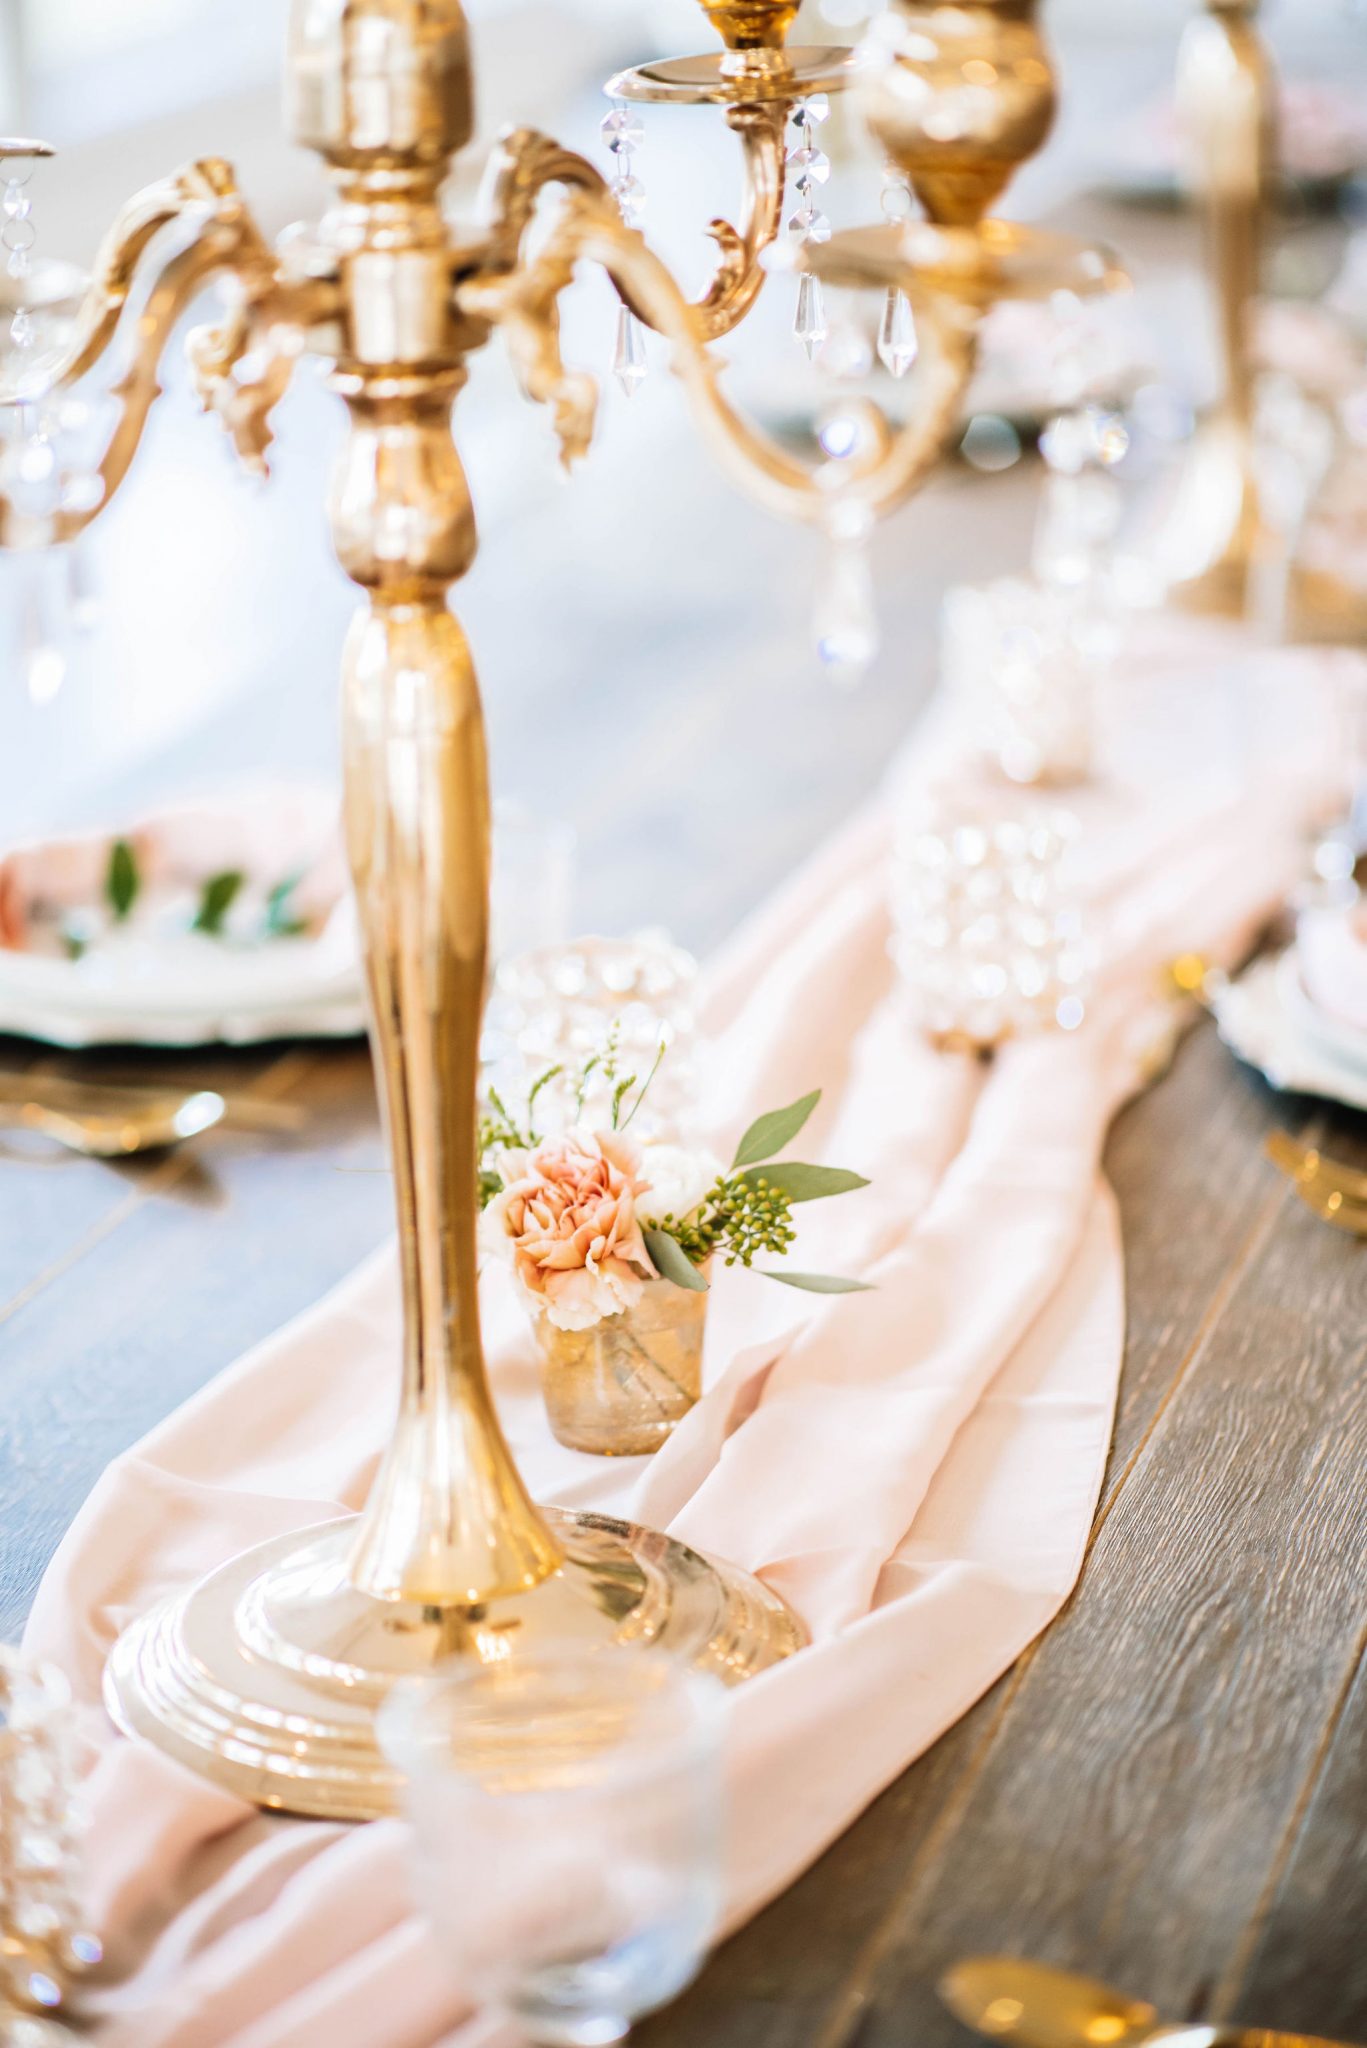 Enchanting ballroom wedding decor inspiration with golden candelabras, pink silk and crystal accents